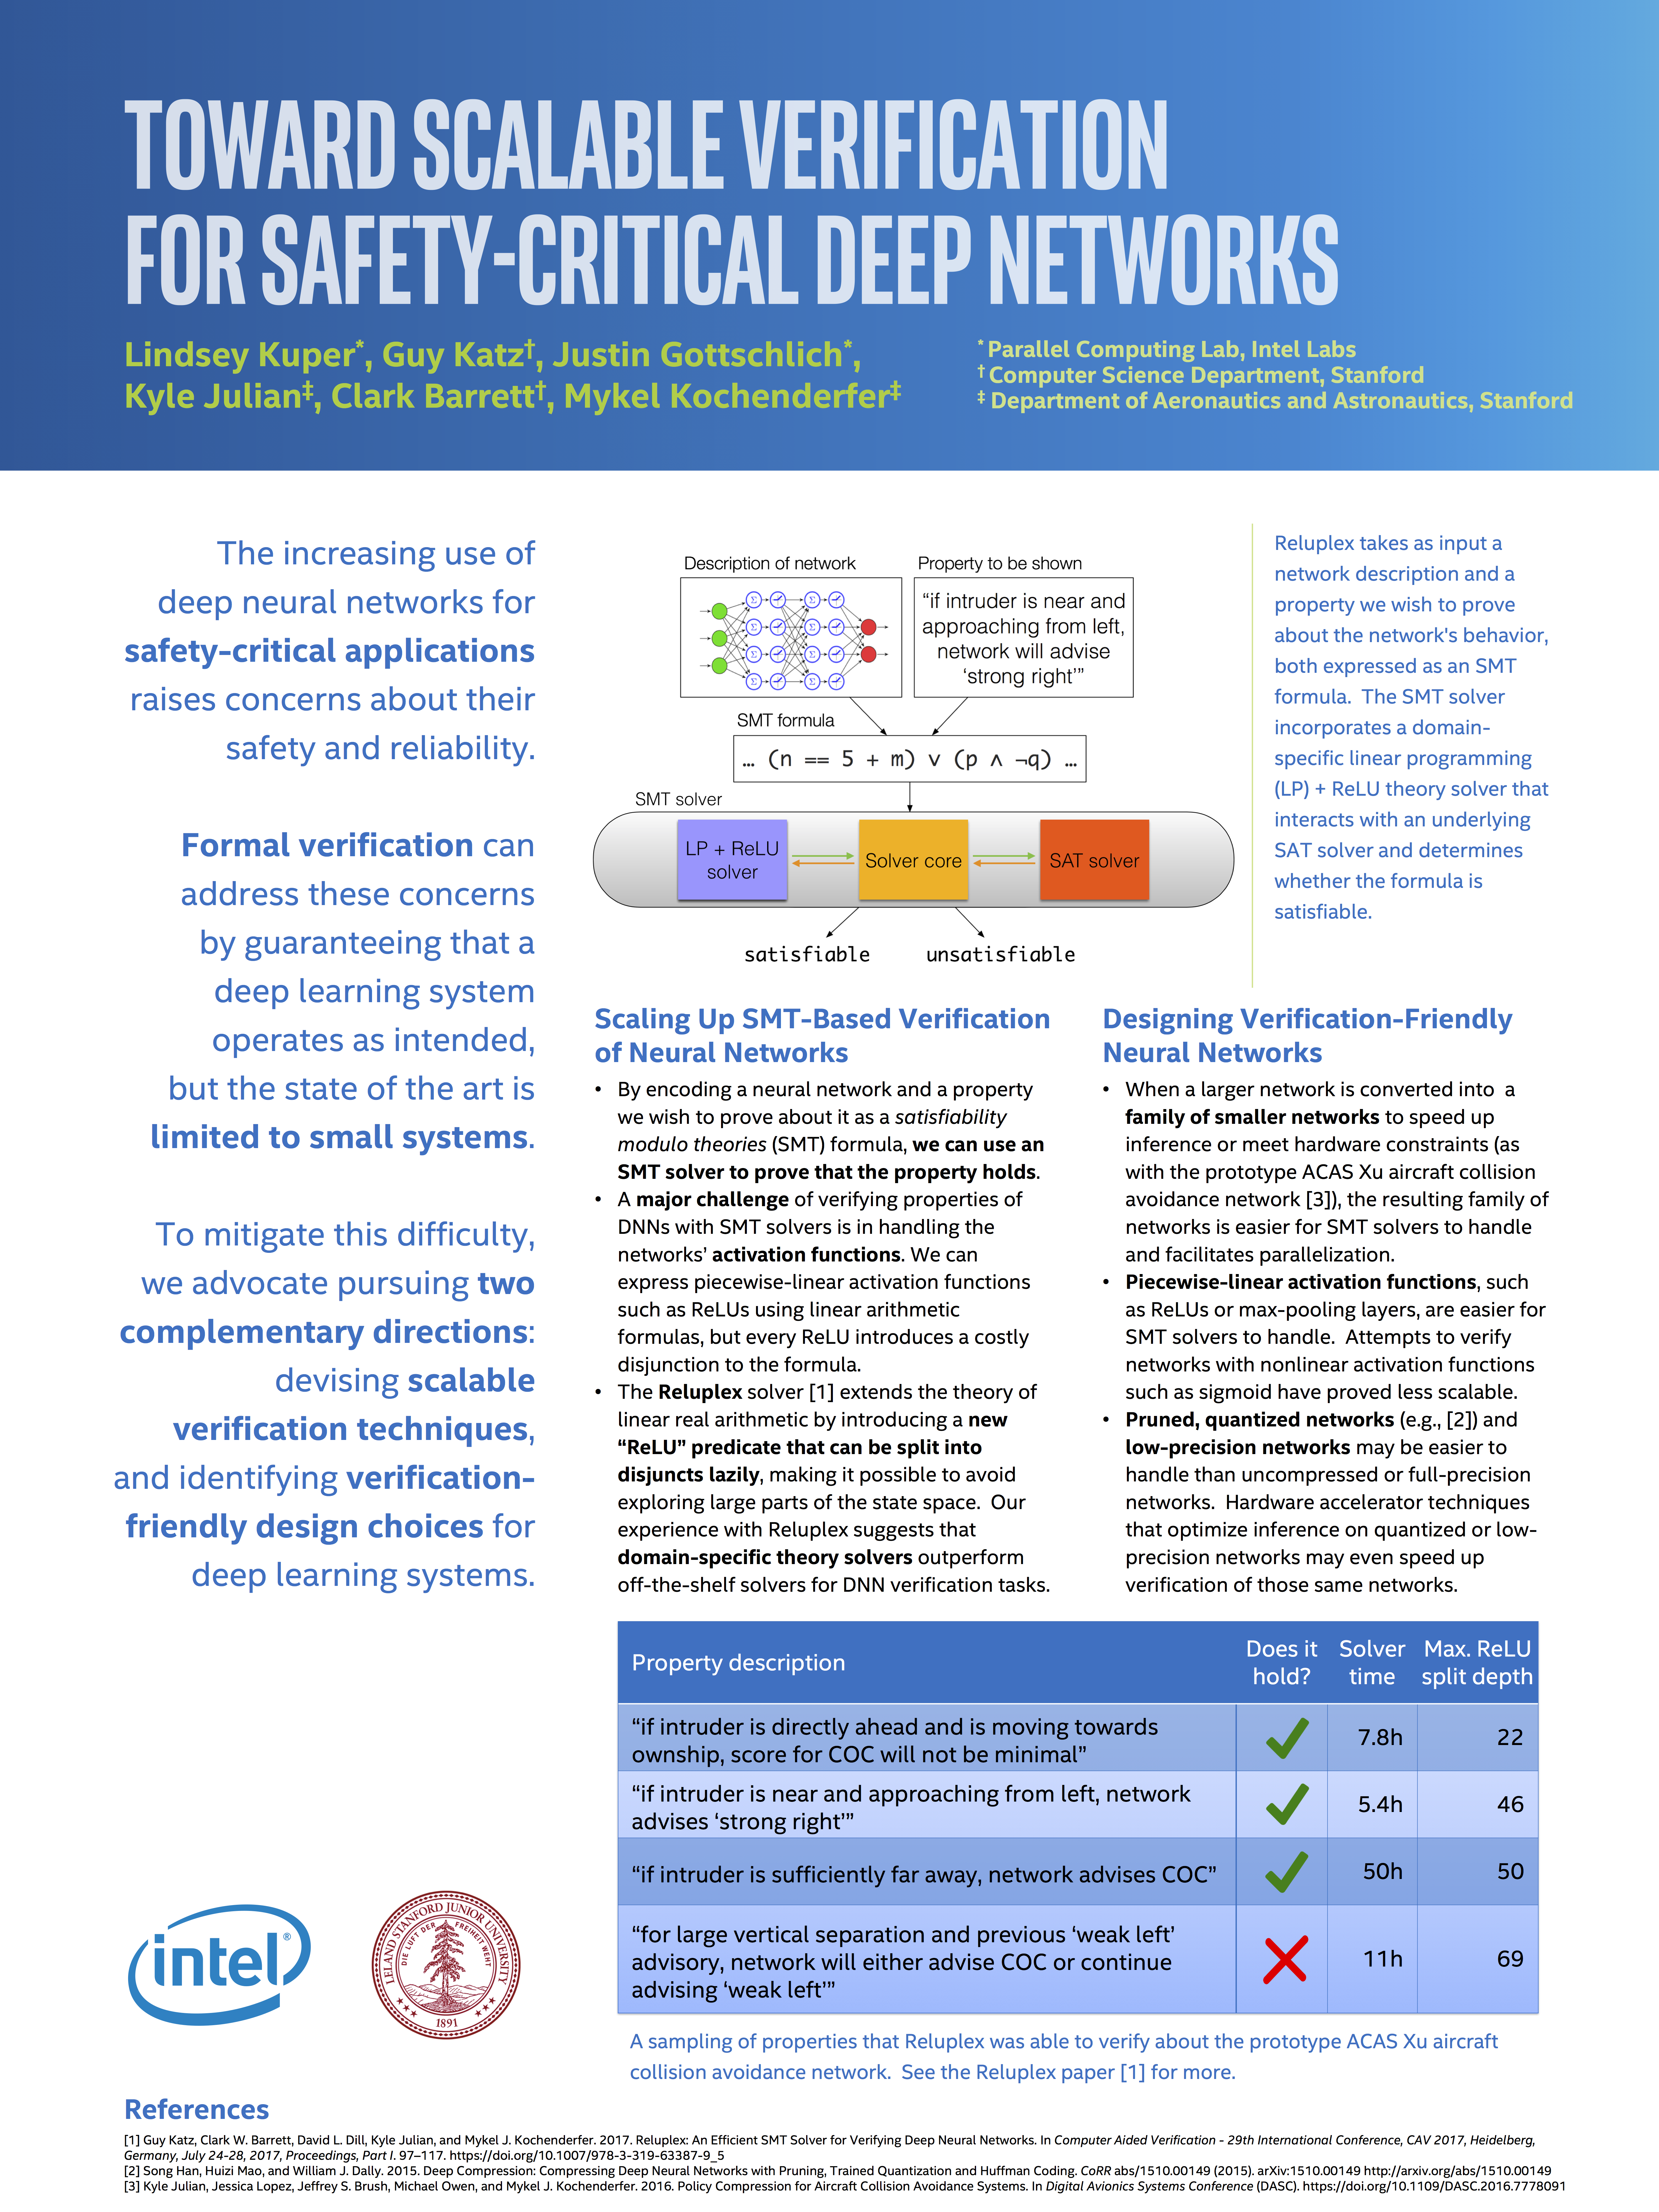 Our poster, 'Toward Scalable Verification for Safety-Critical Deep Networks', appearing at SysML this year.